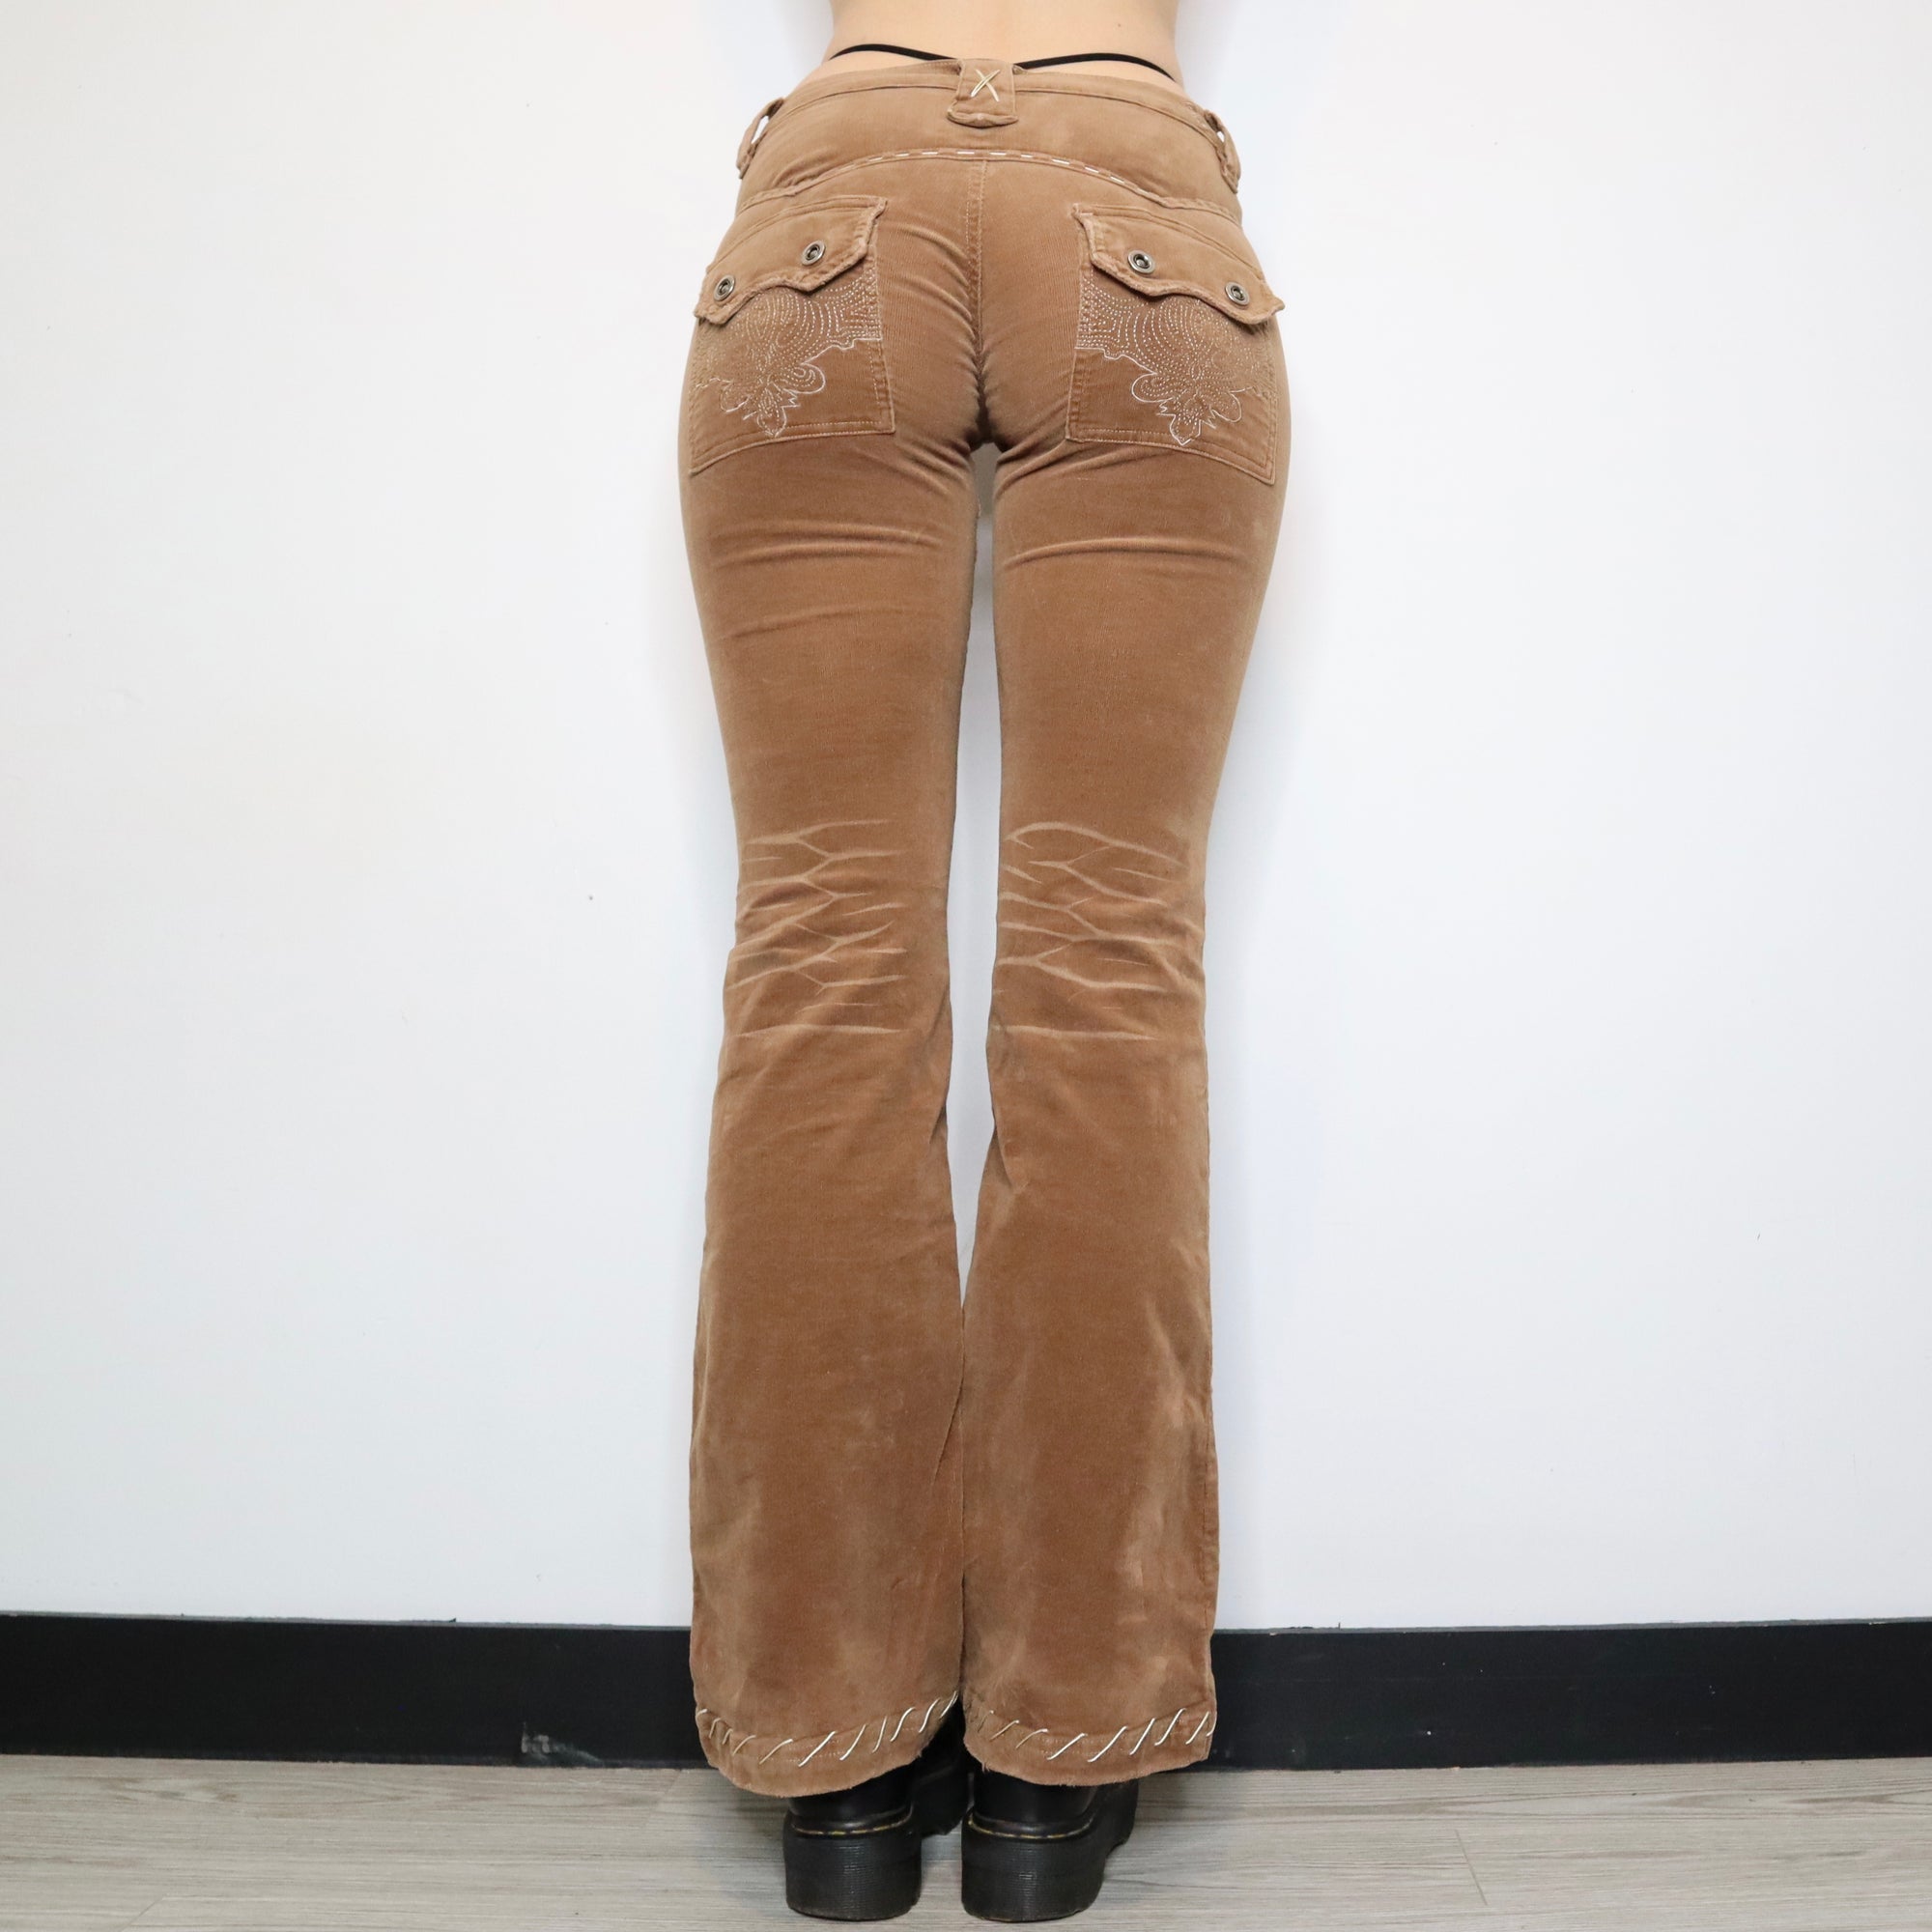 Vintage Early 2000s Warm Brown Corduroy Flare Pants